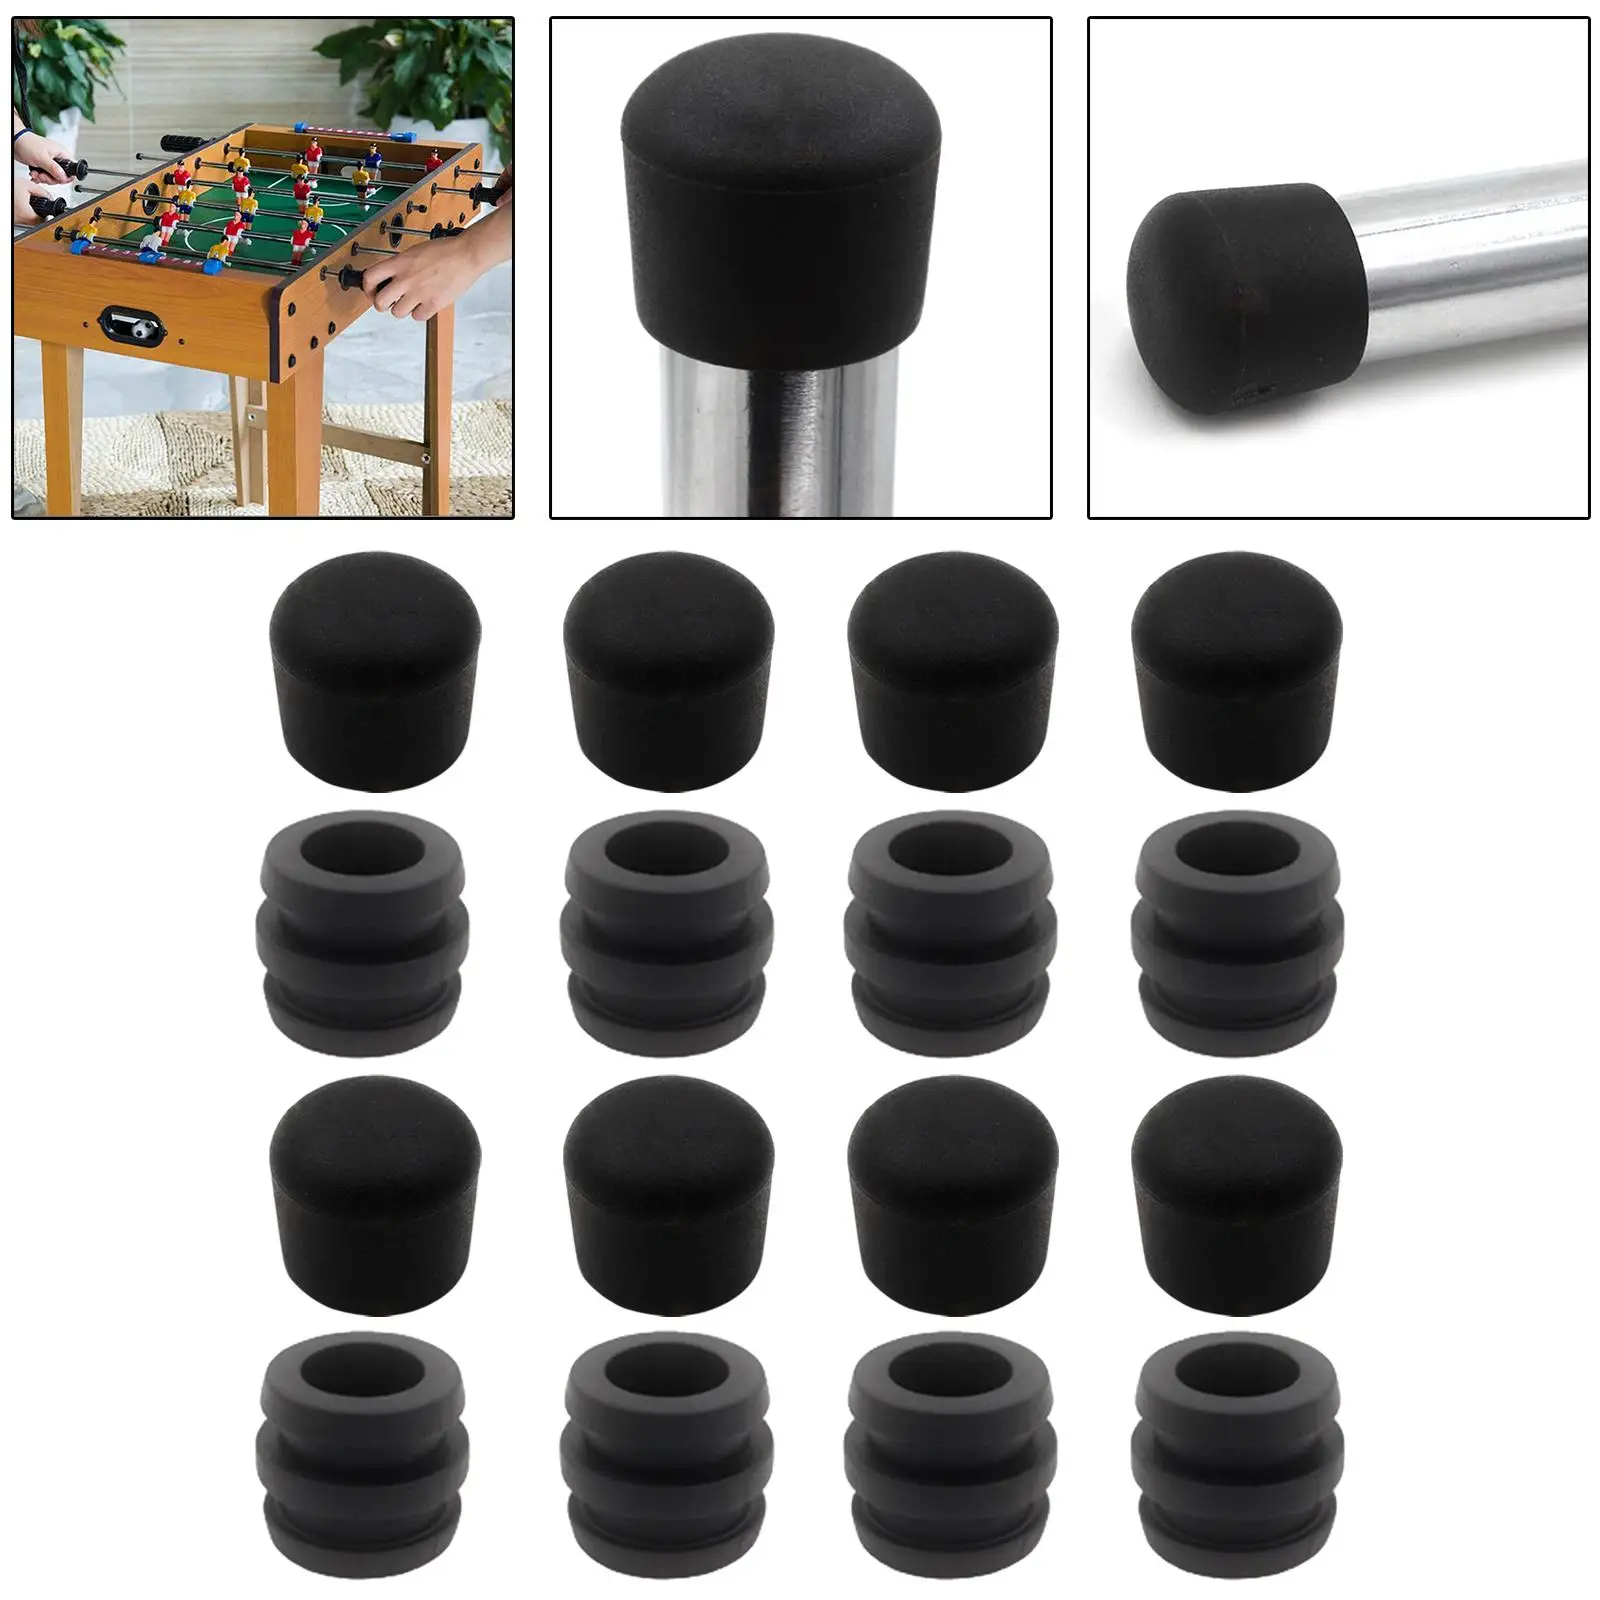 Rod Bumpers End Caps Accessories Fussball Durable Table Soccer Standard Foosball Tables Replacement Universal Rod Bumper Buffer